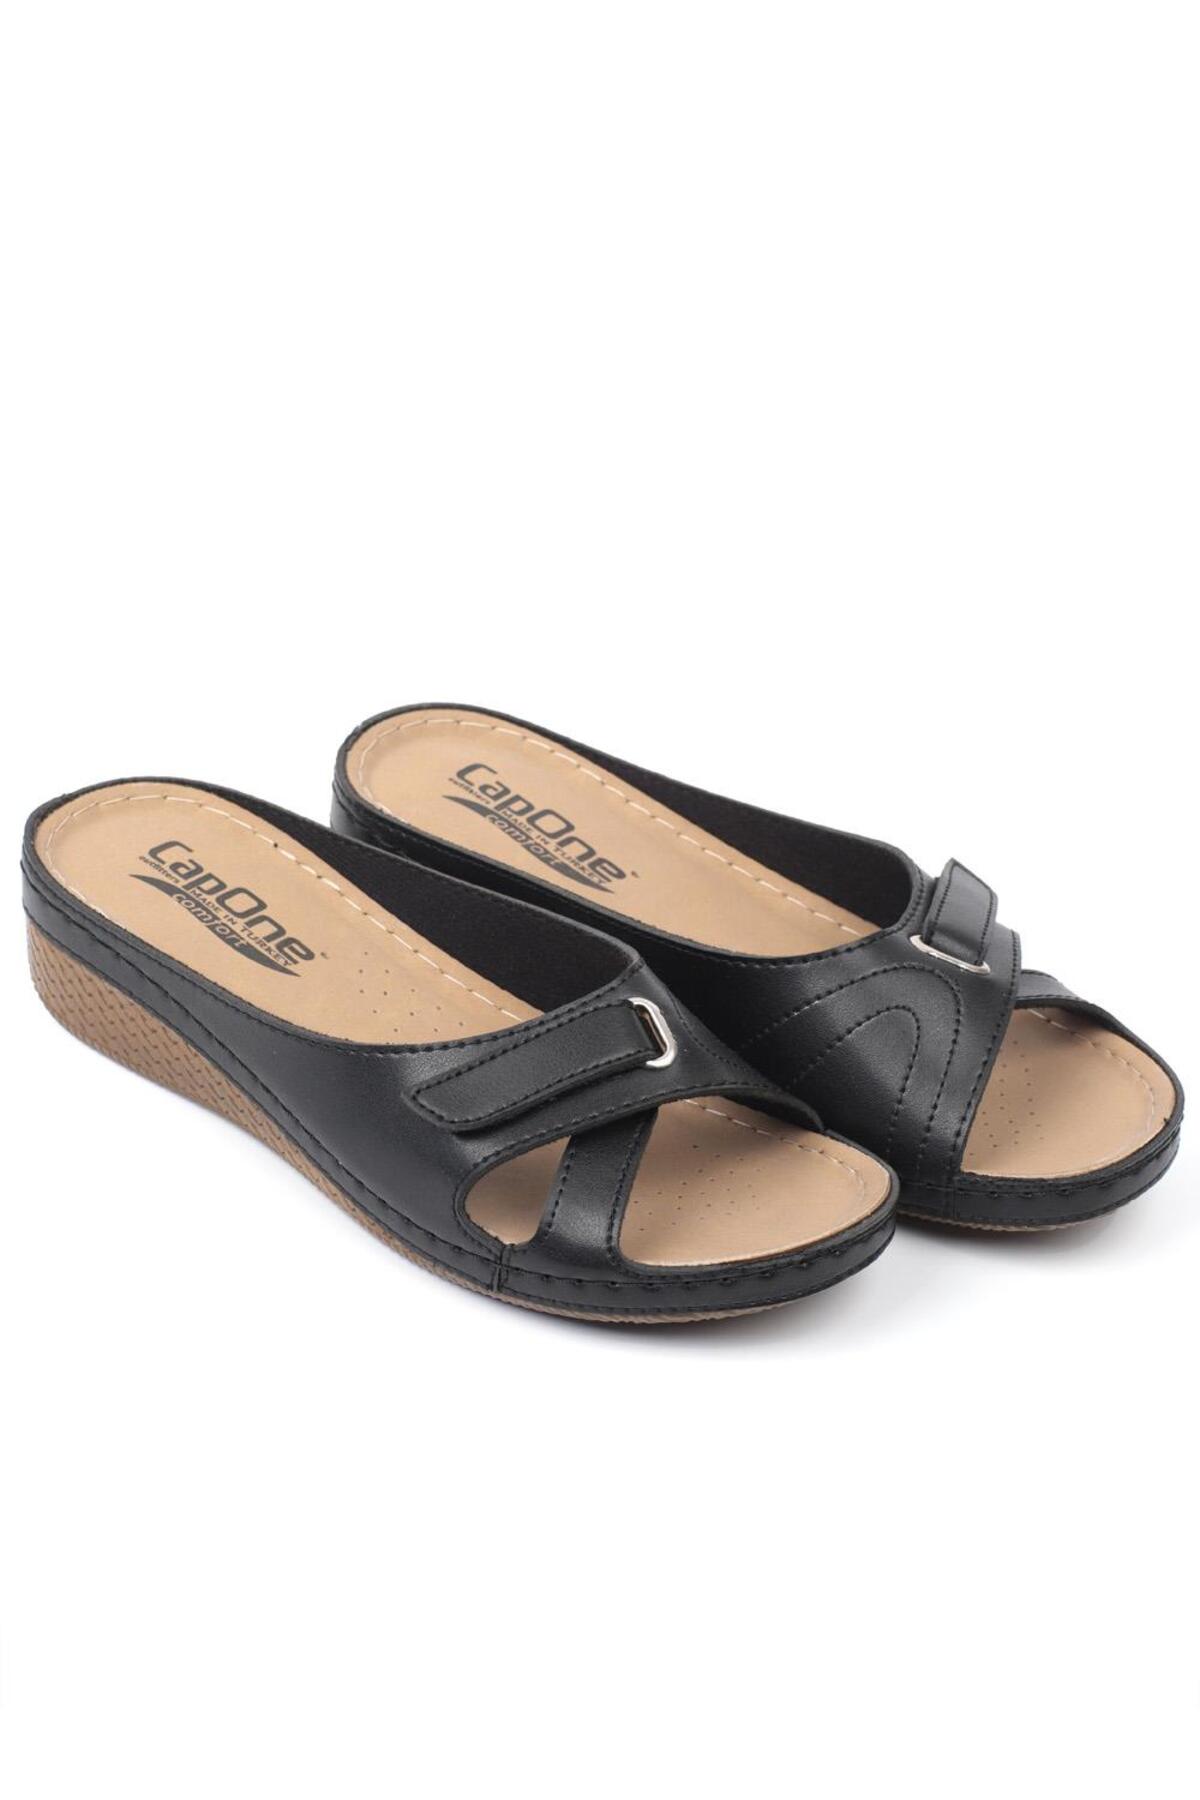 Capone Outfitters Capone Z0777 Black Women's Comfort Anatomic Slippers